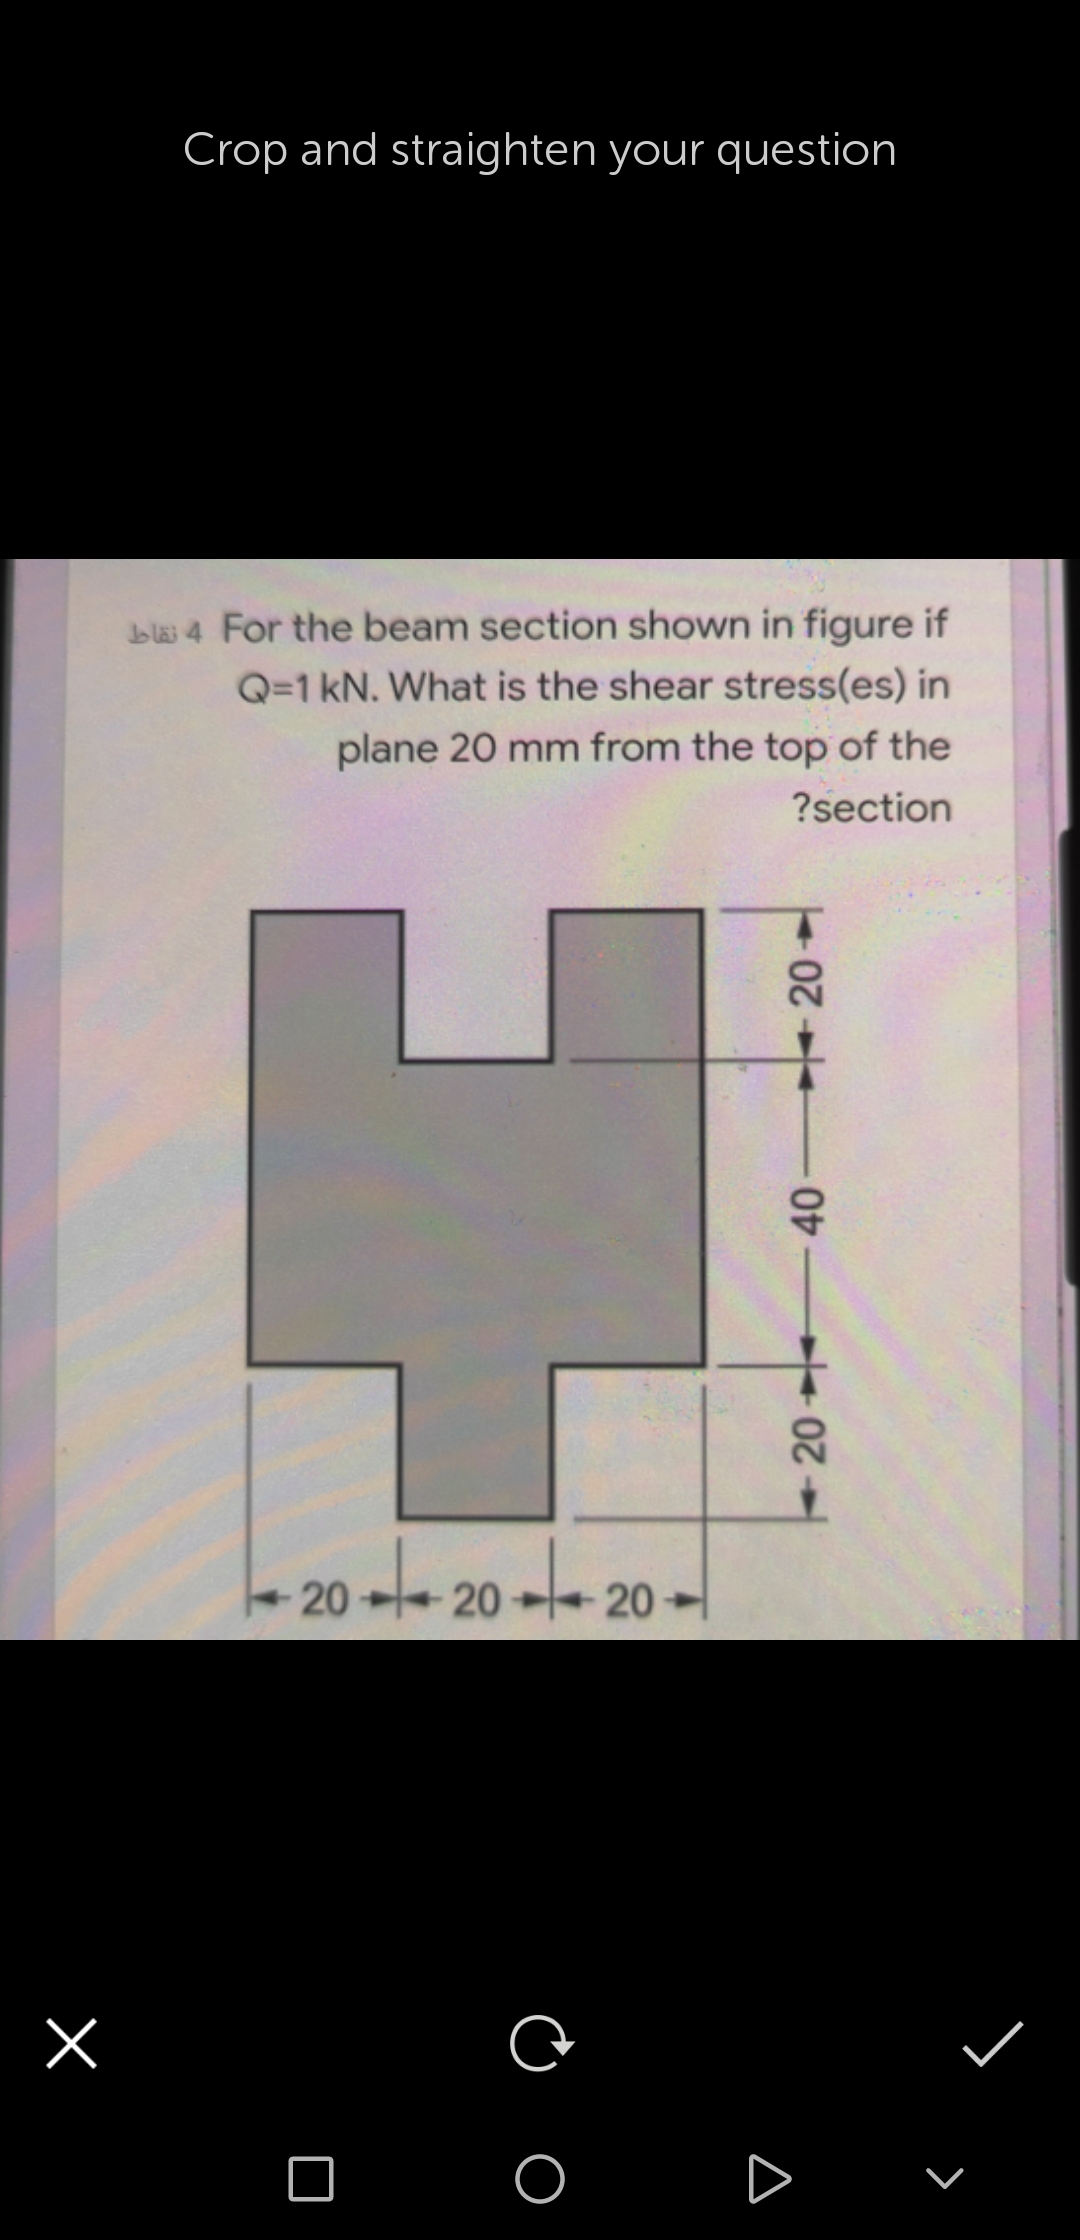 blas 4 For the beam section shown in figure if
Q=1 kN. What is the shear stress(es) in
plane 20 mm from the top of the
?section
